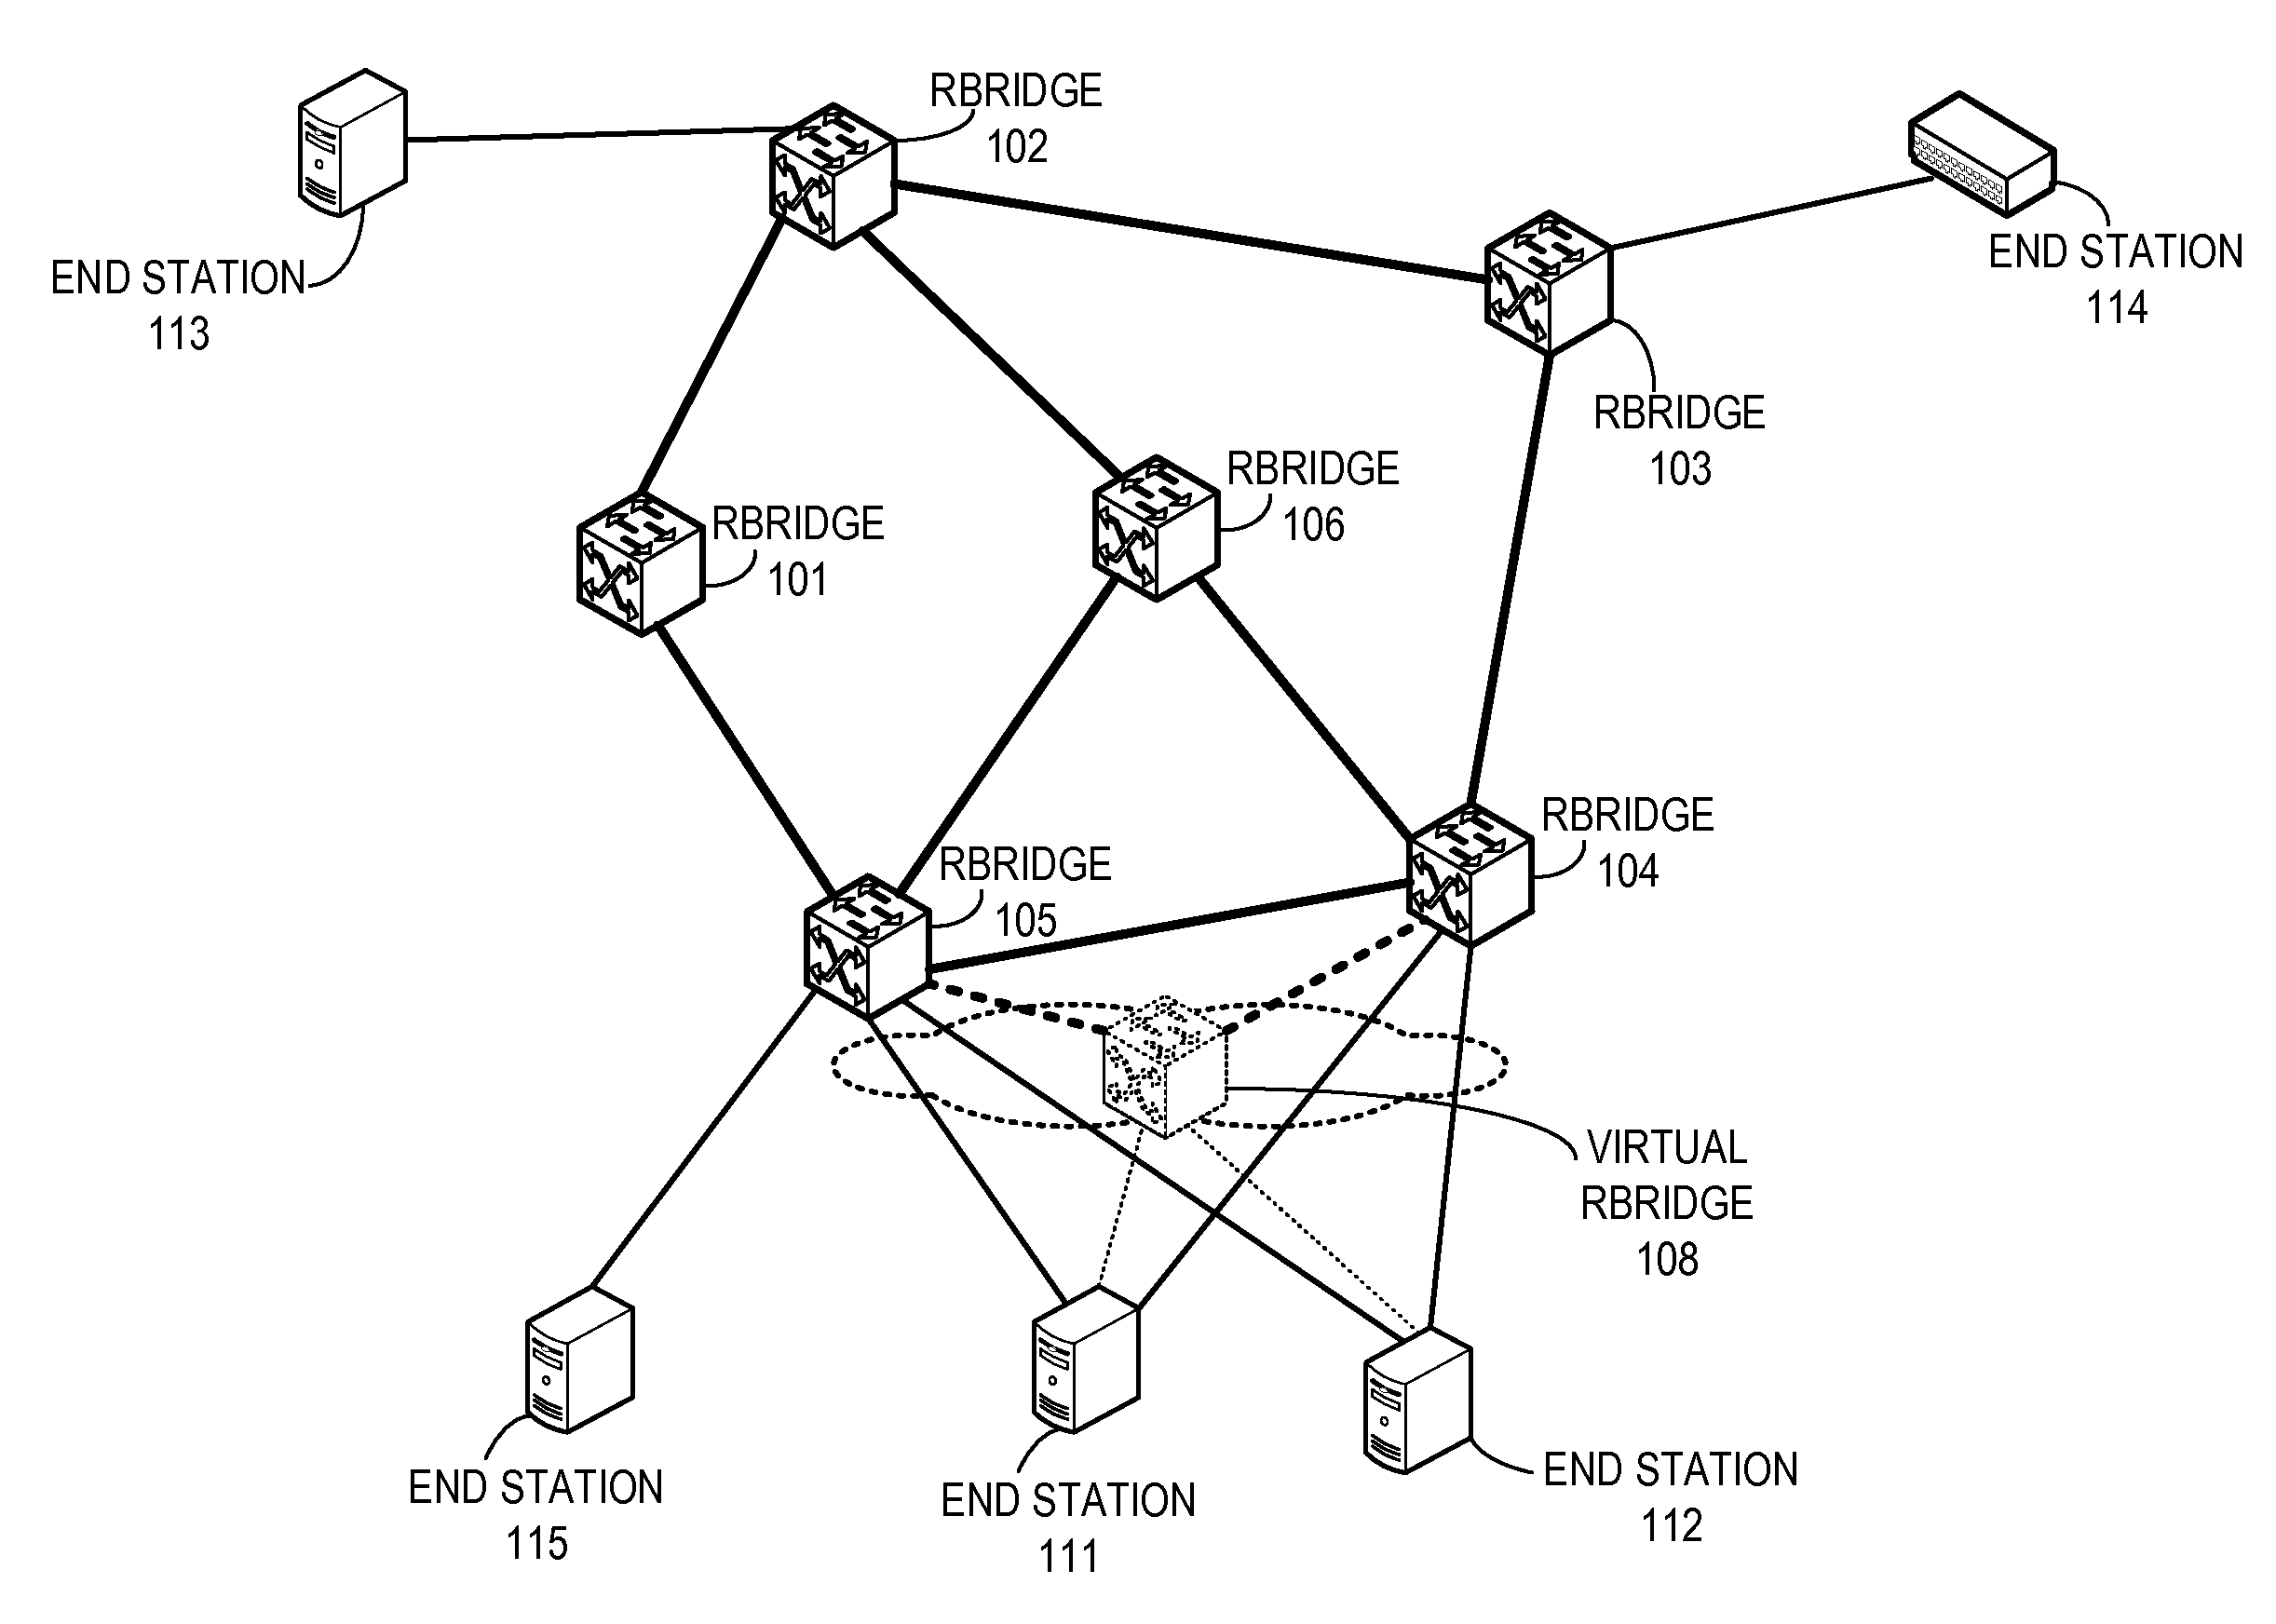 Redundant host connection in a routed network